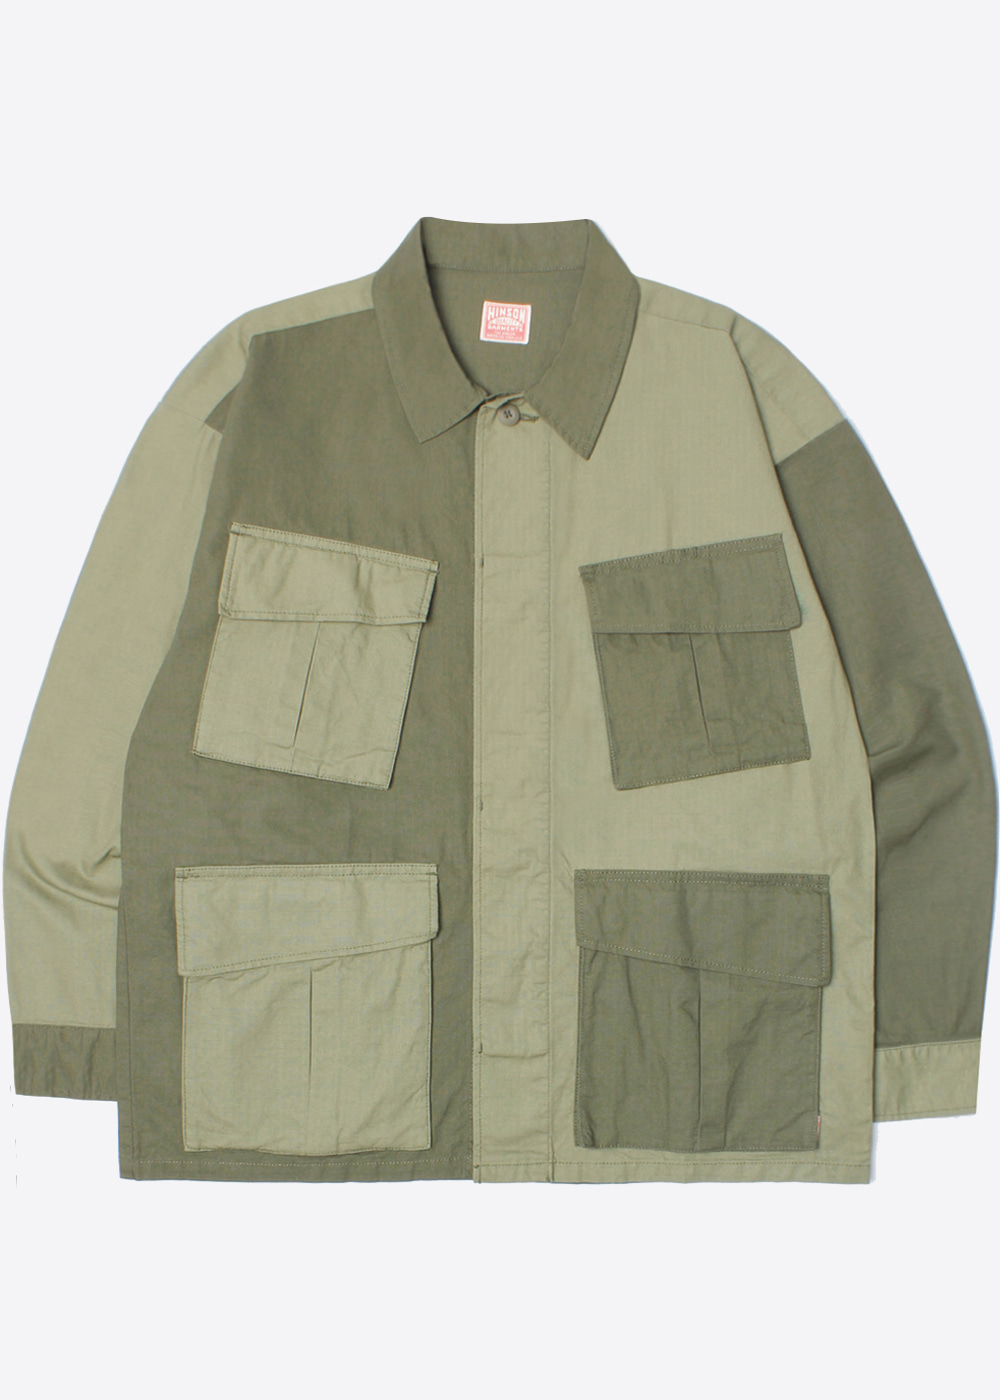 HINSON BY FREAK’S STORE’over fit’patchwork m-65 motive filed parka